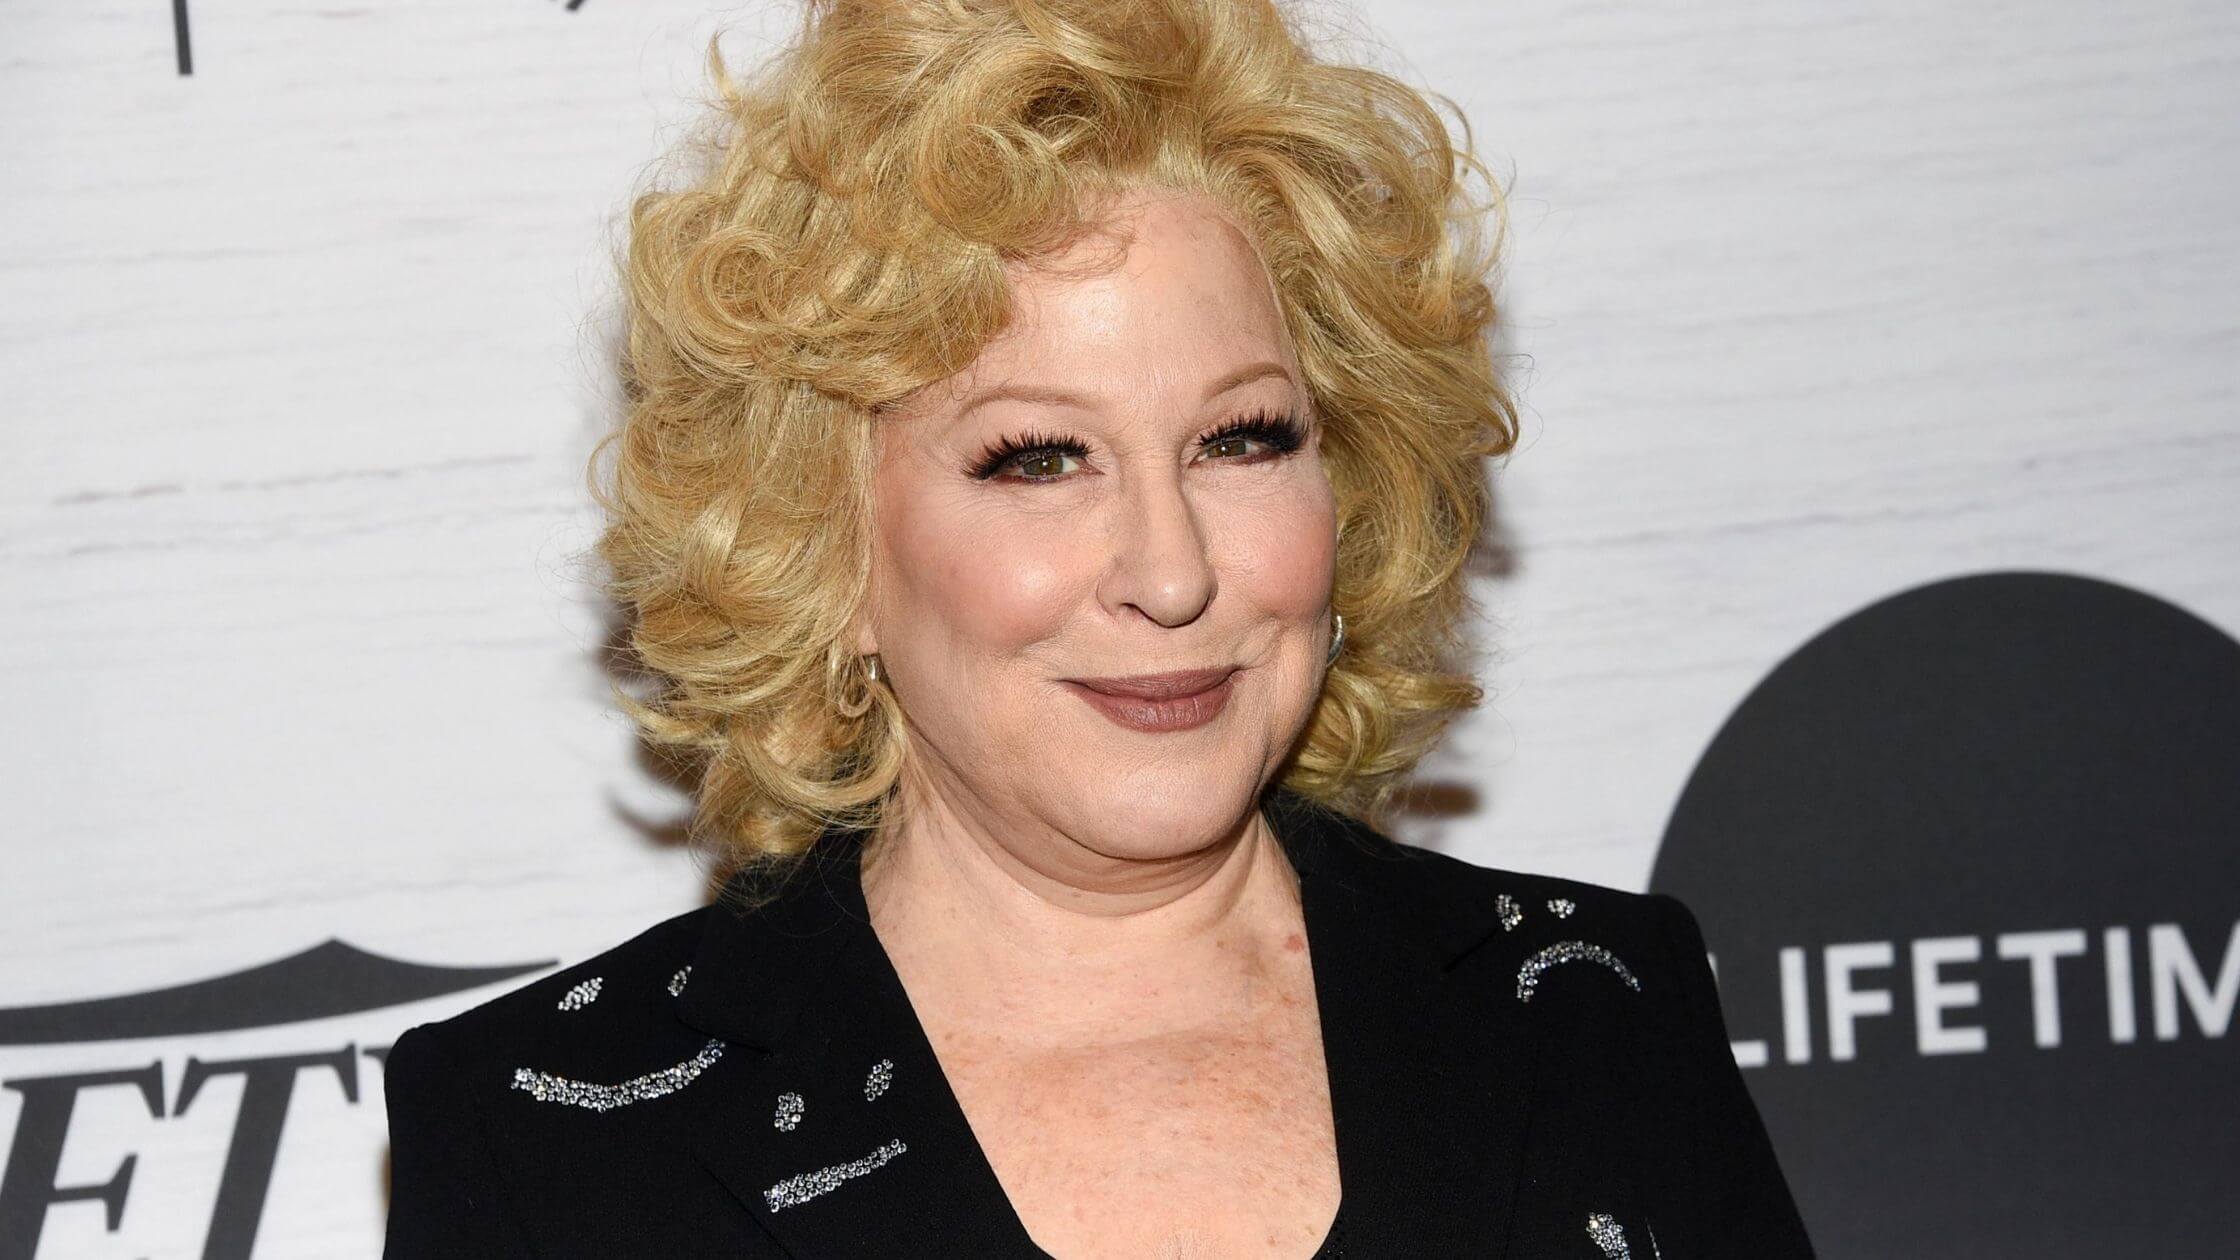 Bette Midler Said She Was Not Intending to Be 'Transphobic' By Tweeting About the Erasure of Women